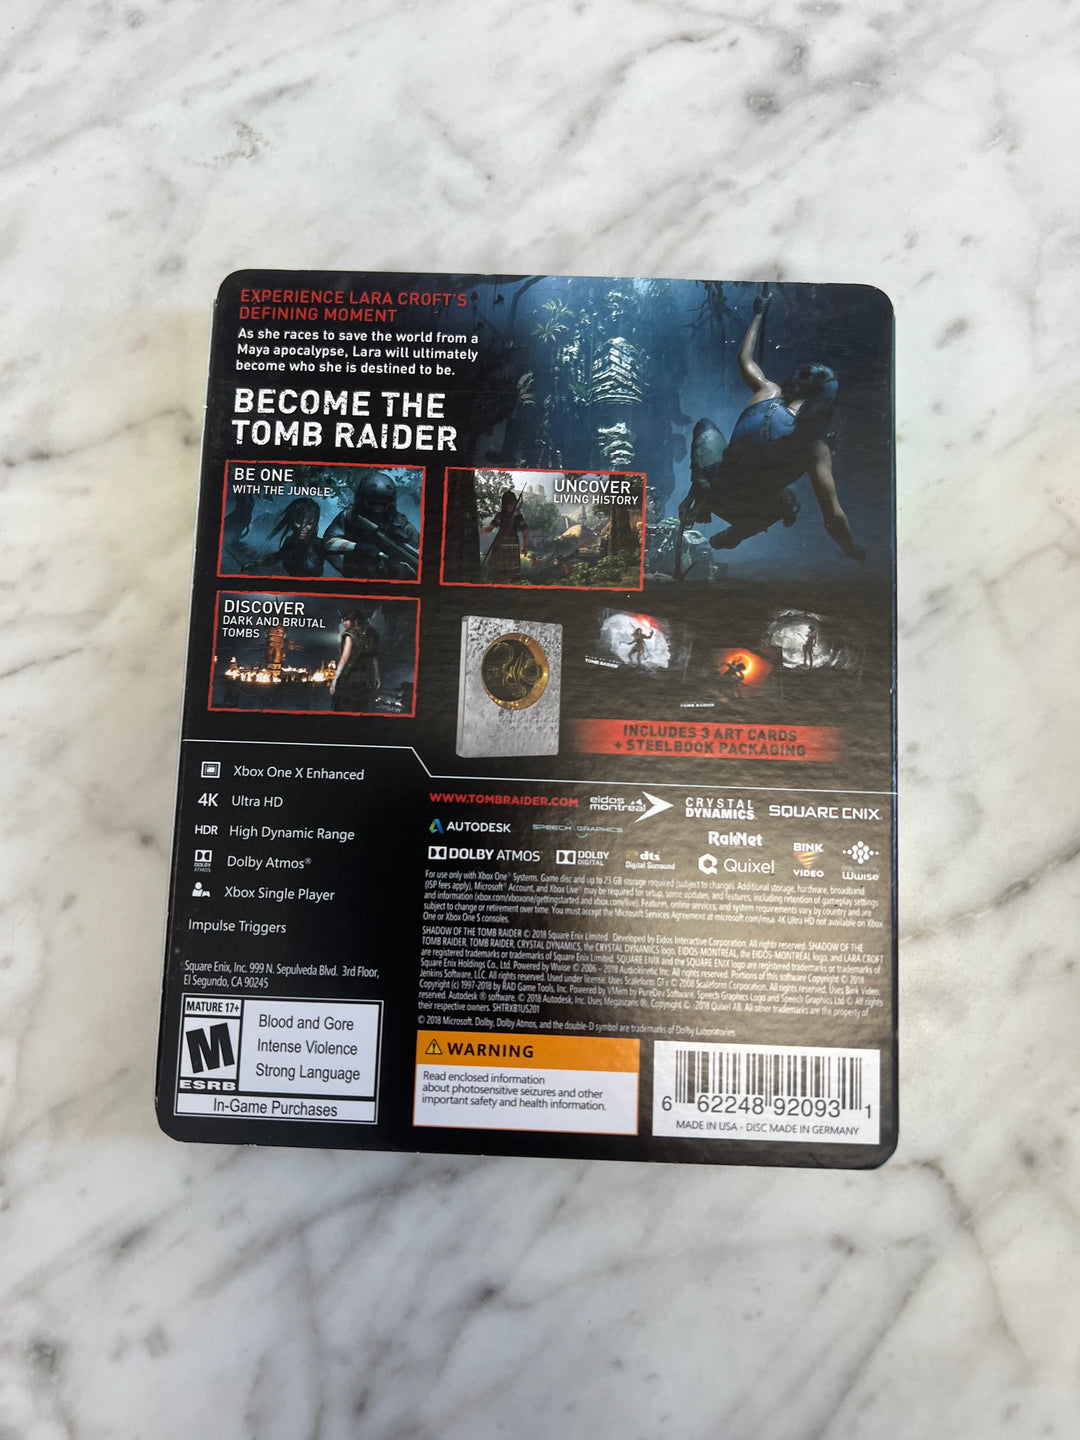 Shadow of the Tomb Raider XBox One Steelbook Only No Game    DO61624